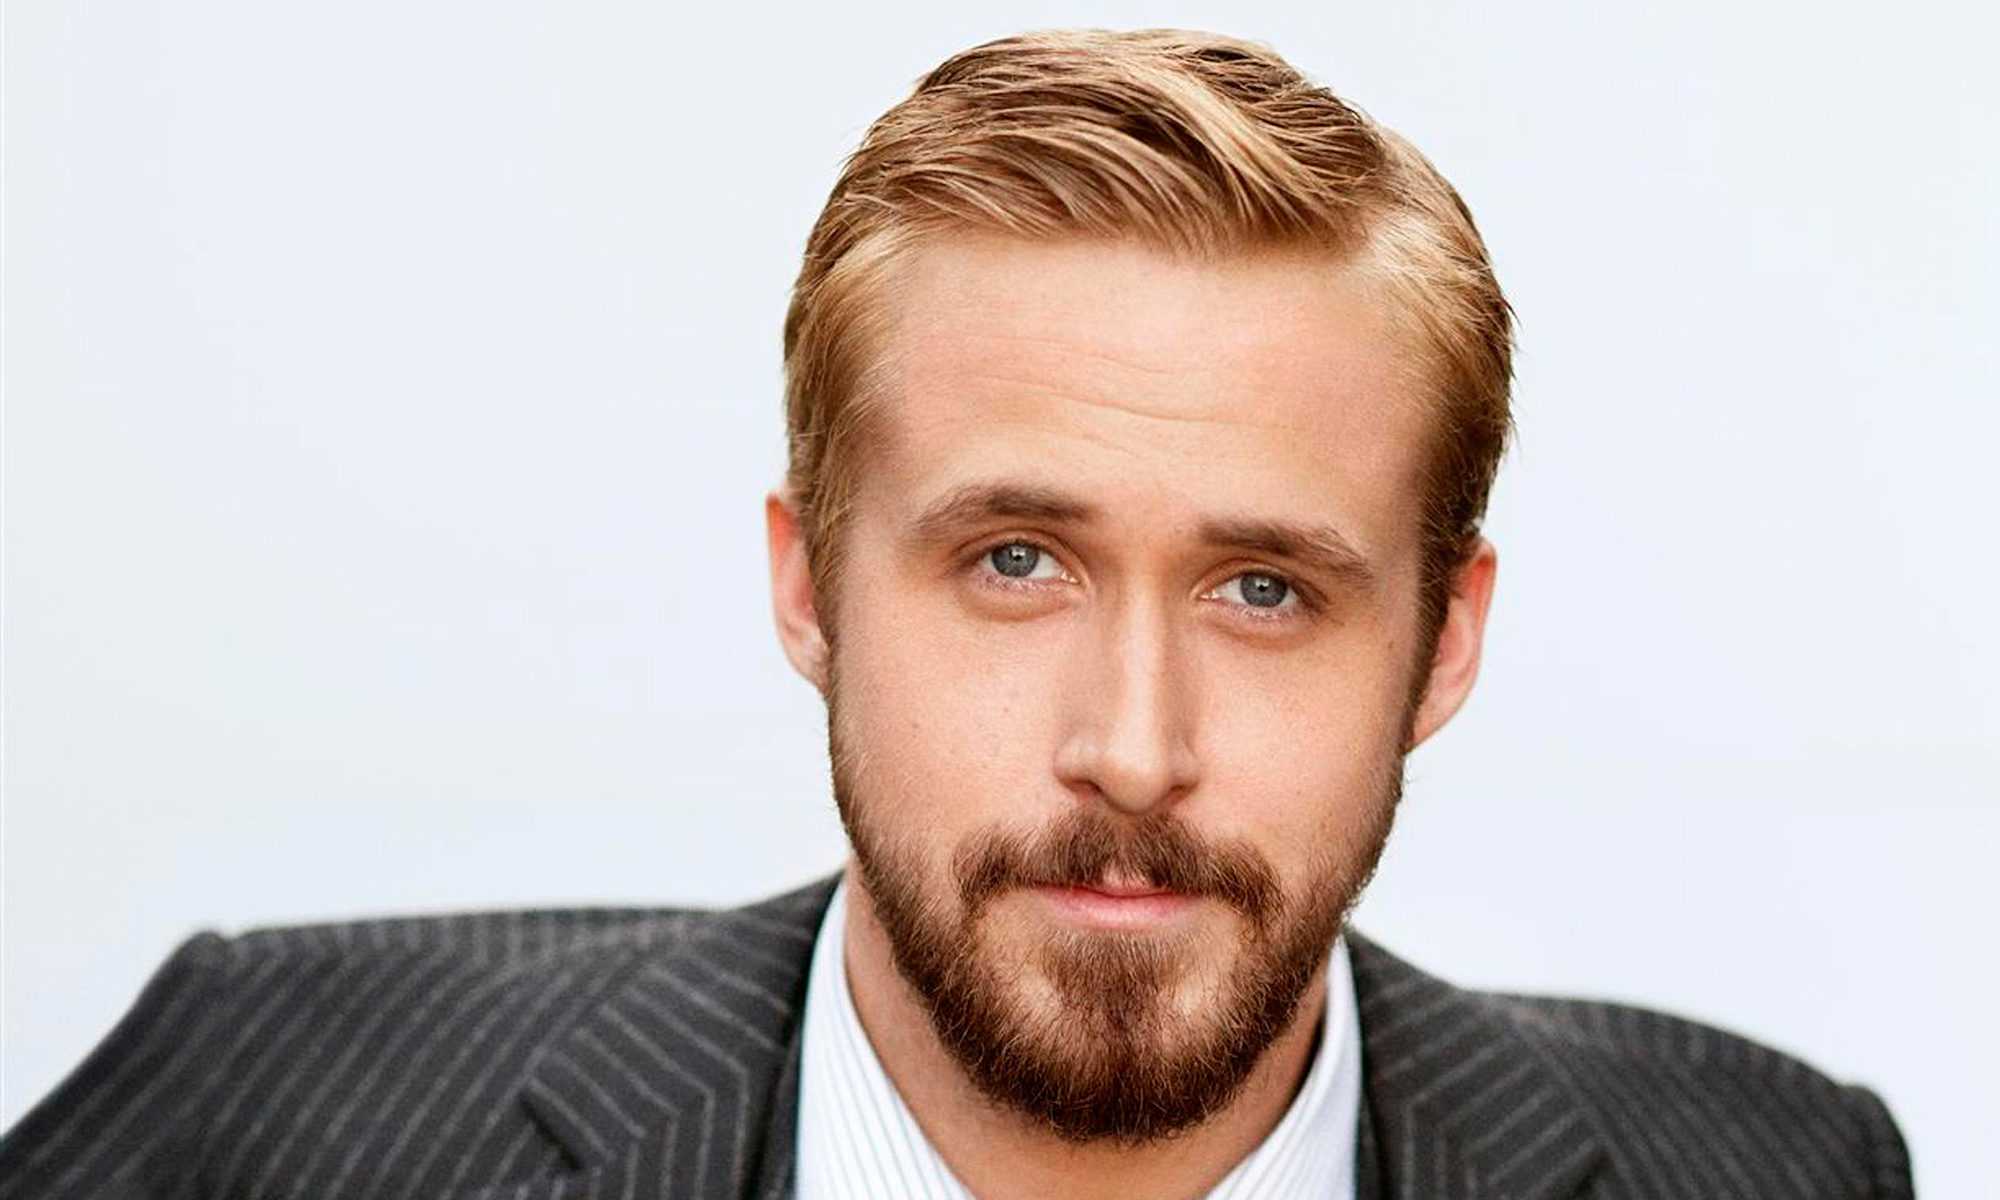 'Gosling Fantastic Four stuff': The buzz around Ryan Gosling's possible entry into MCU – from Ghost Rider to Doctor Doom